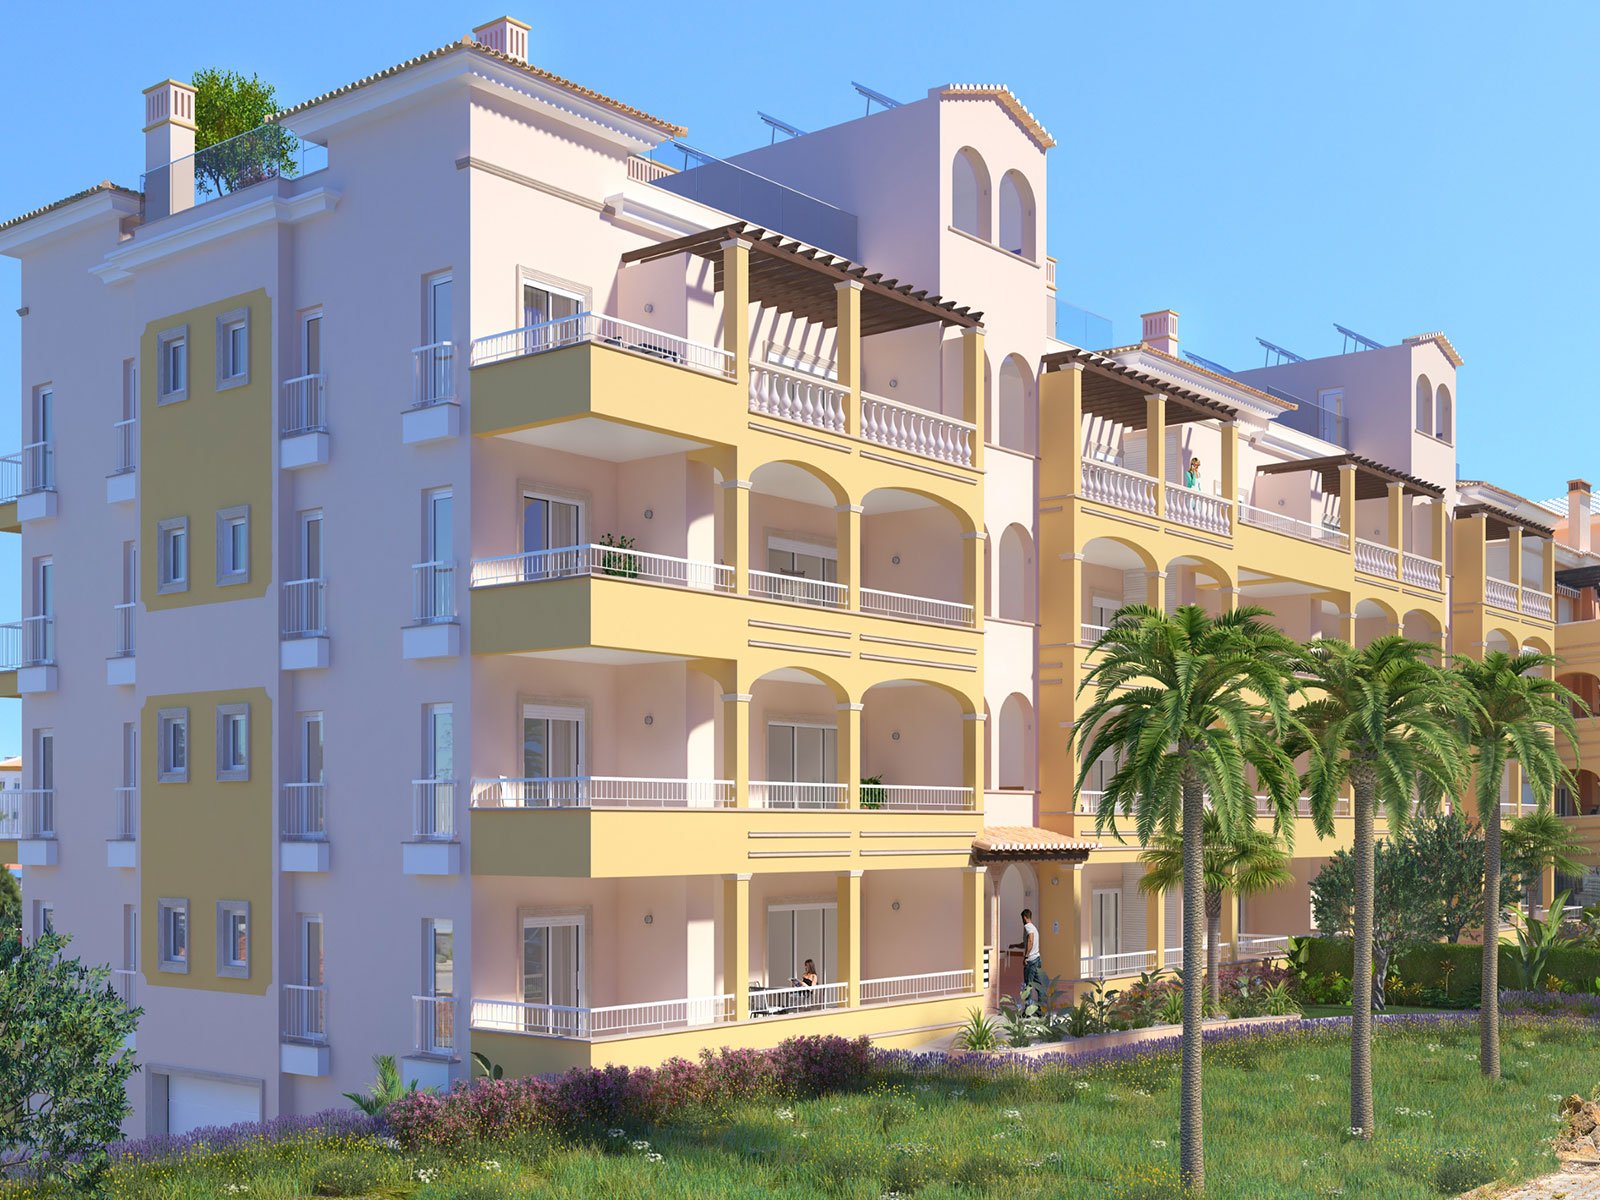 3 bedroom apartment with balcony in a new development in Lagos 4209407494